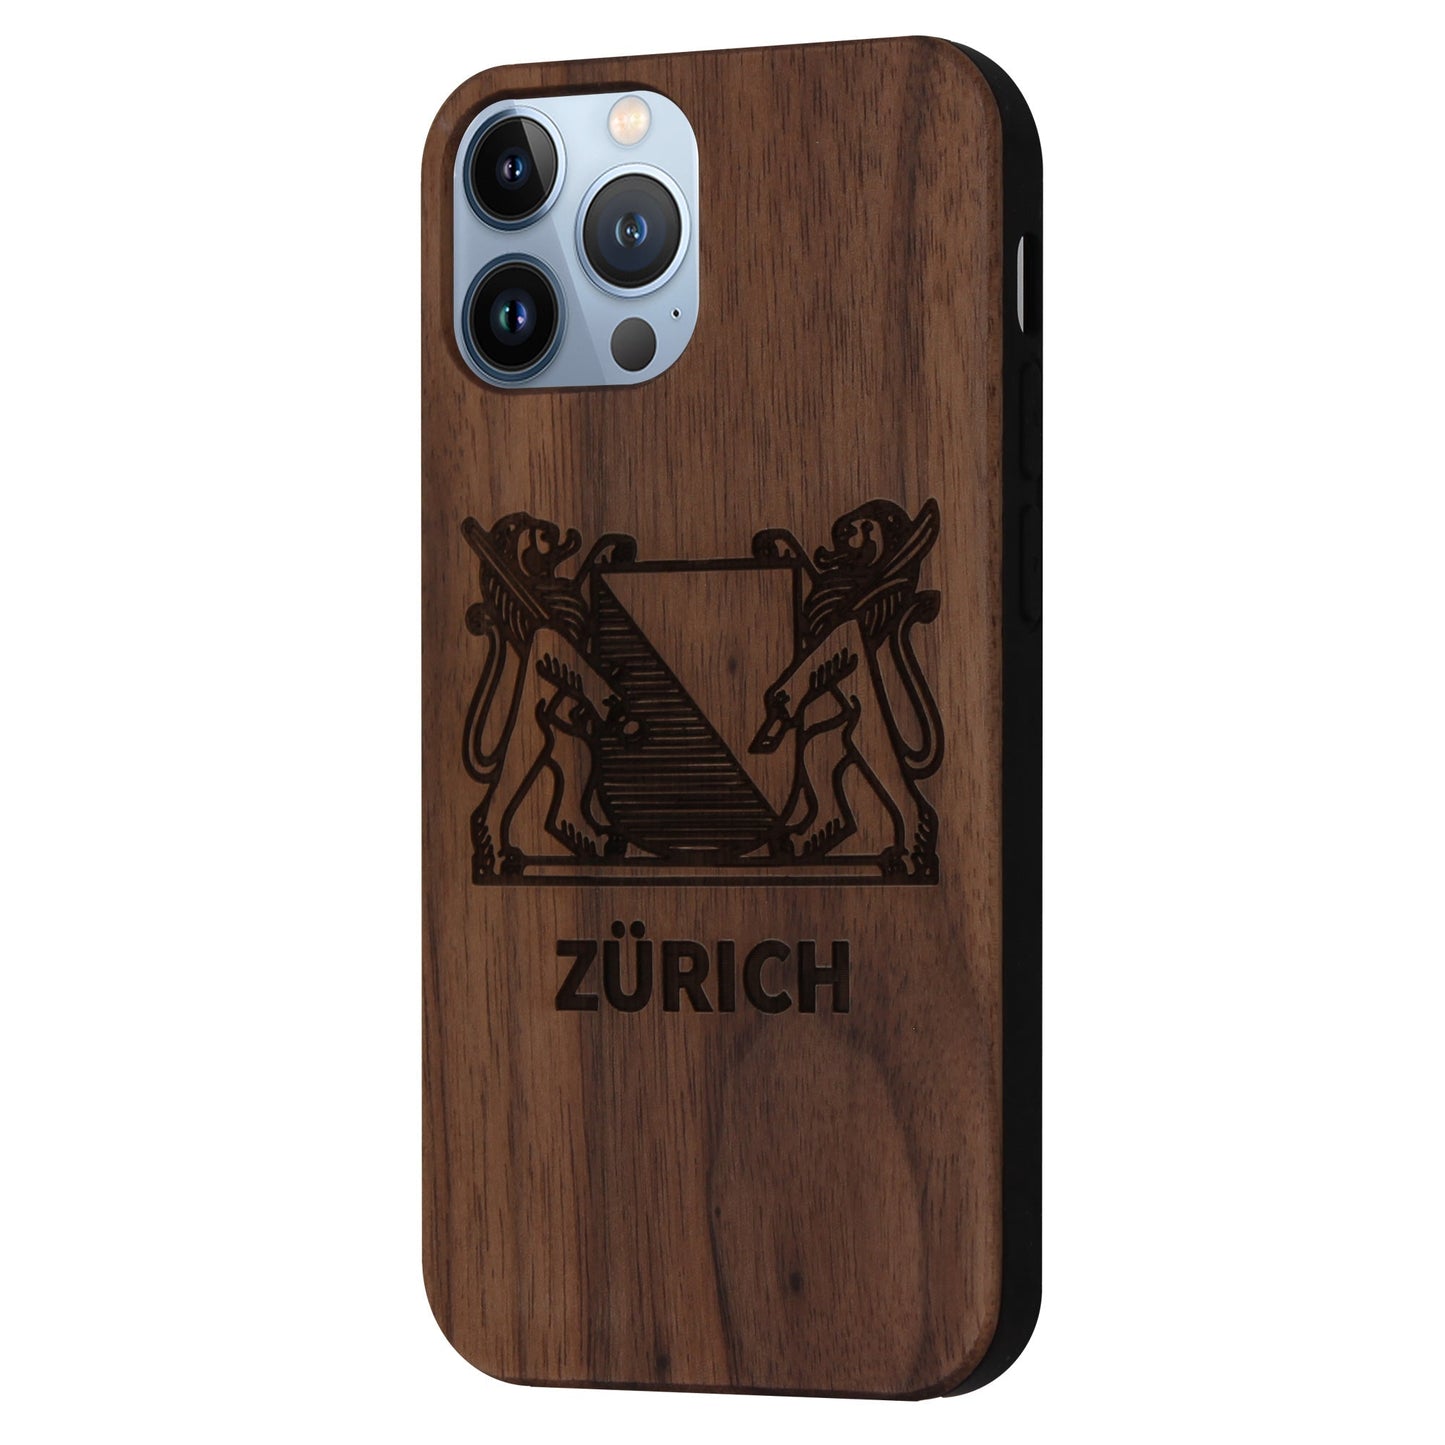 Zurich coat of arms Eden case made of walnut wood for iPhone 13 Pro Max